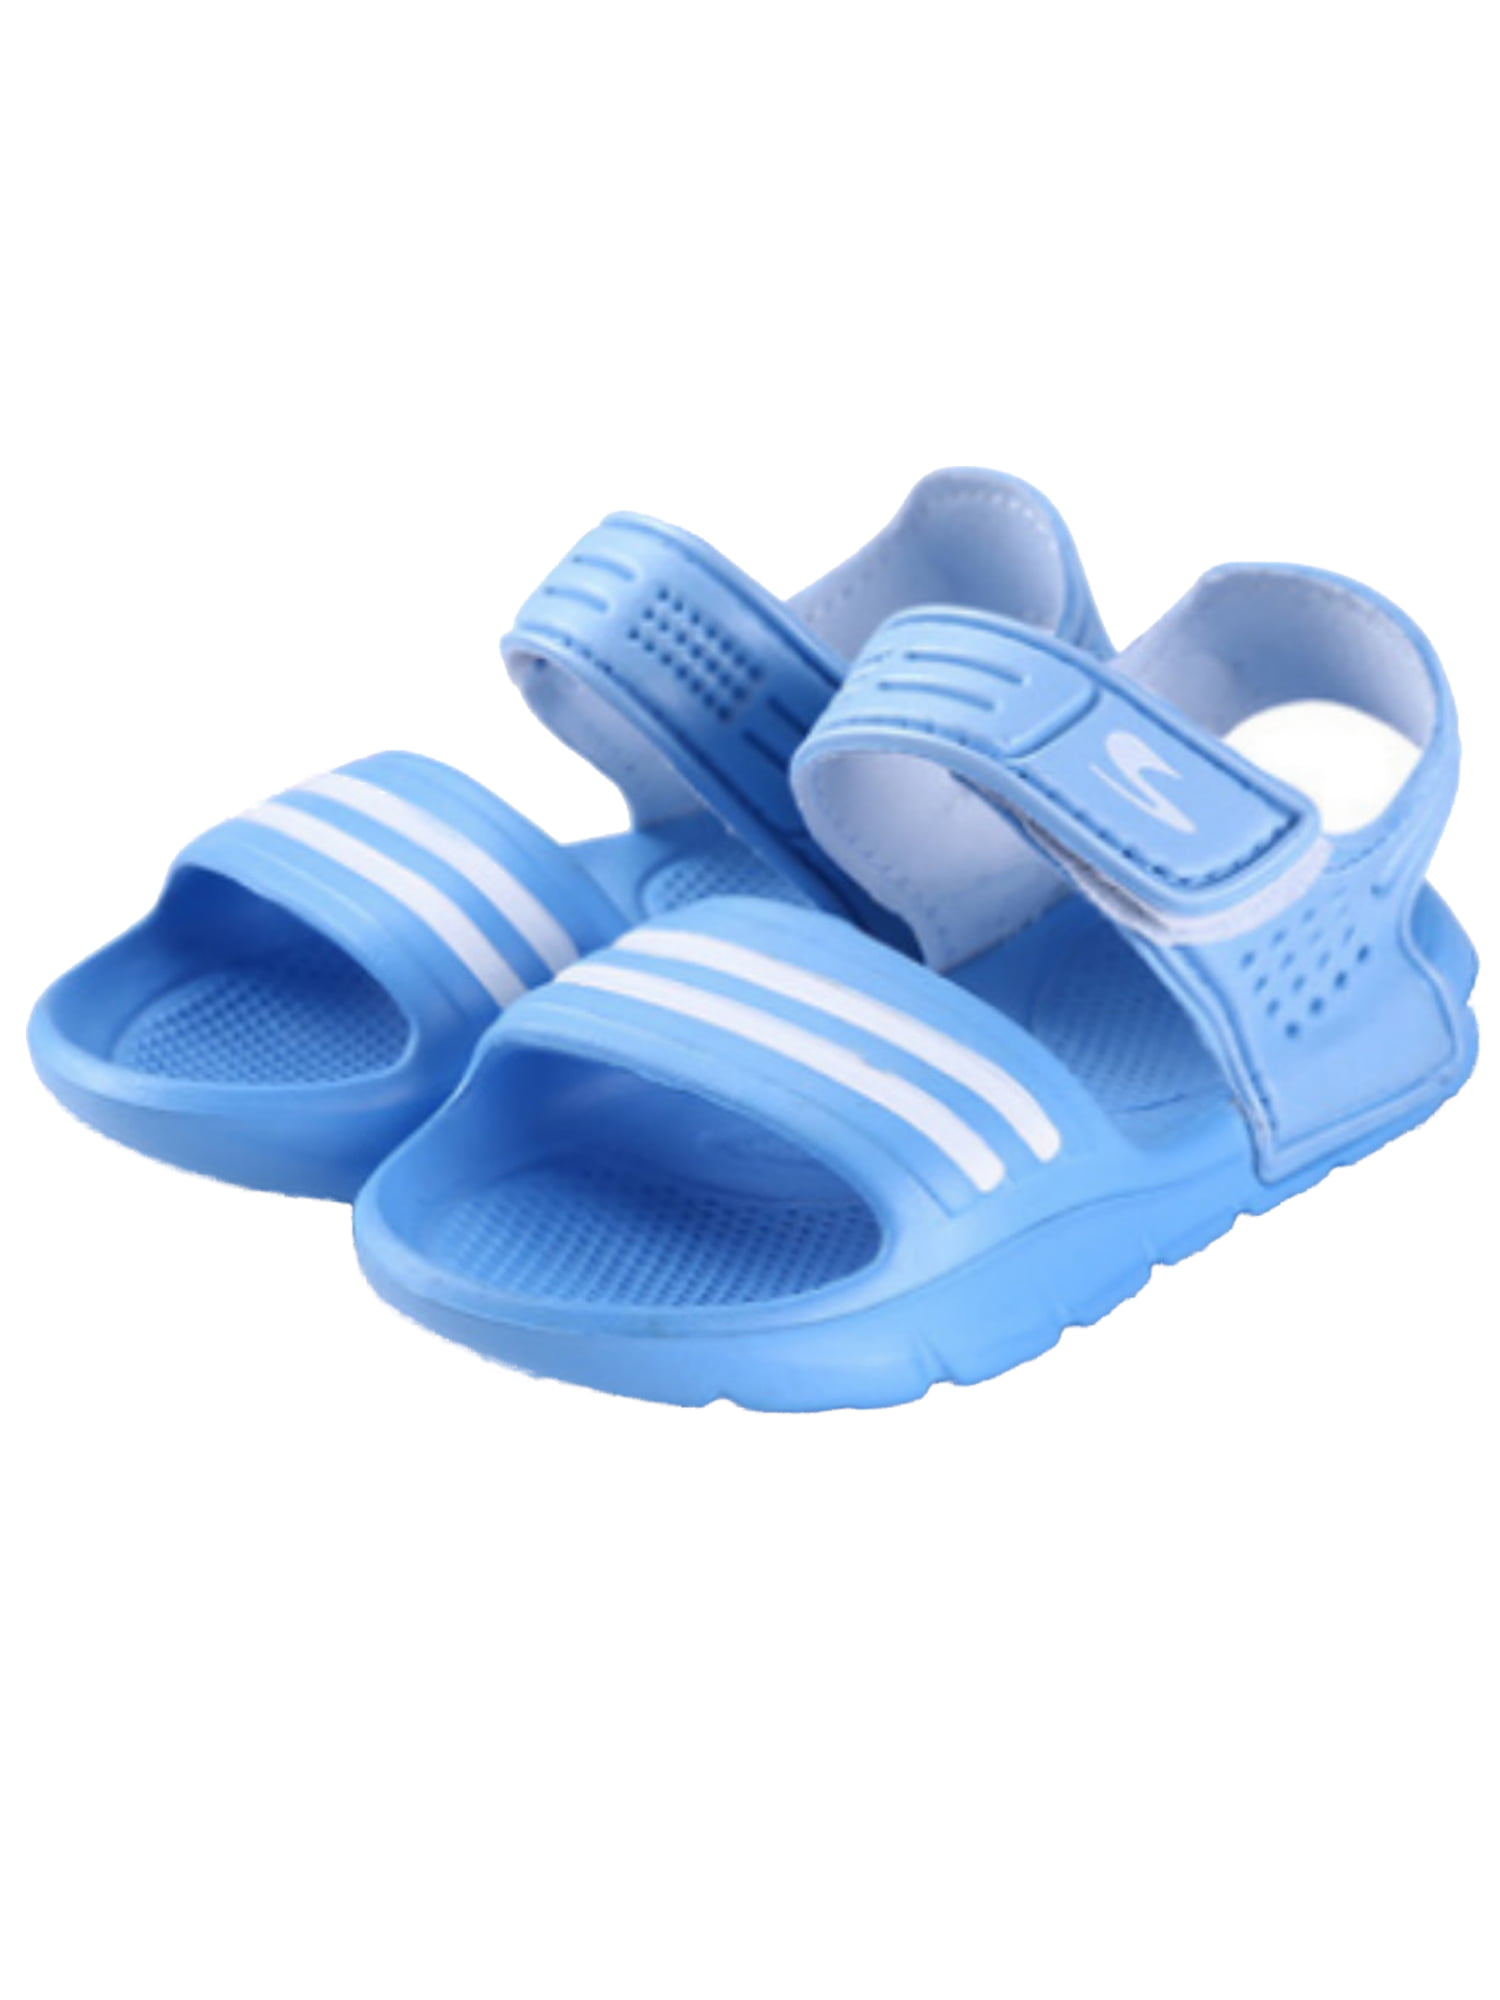 ❤️ Sunbona Toddler Baby Boys Girls Beach Sandals Infant Kids Summer Leather Sandals Comfortable Breathable Casual Shoes